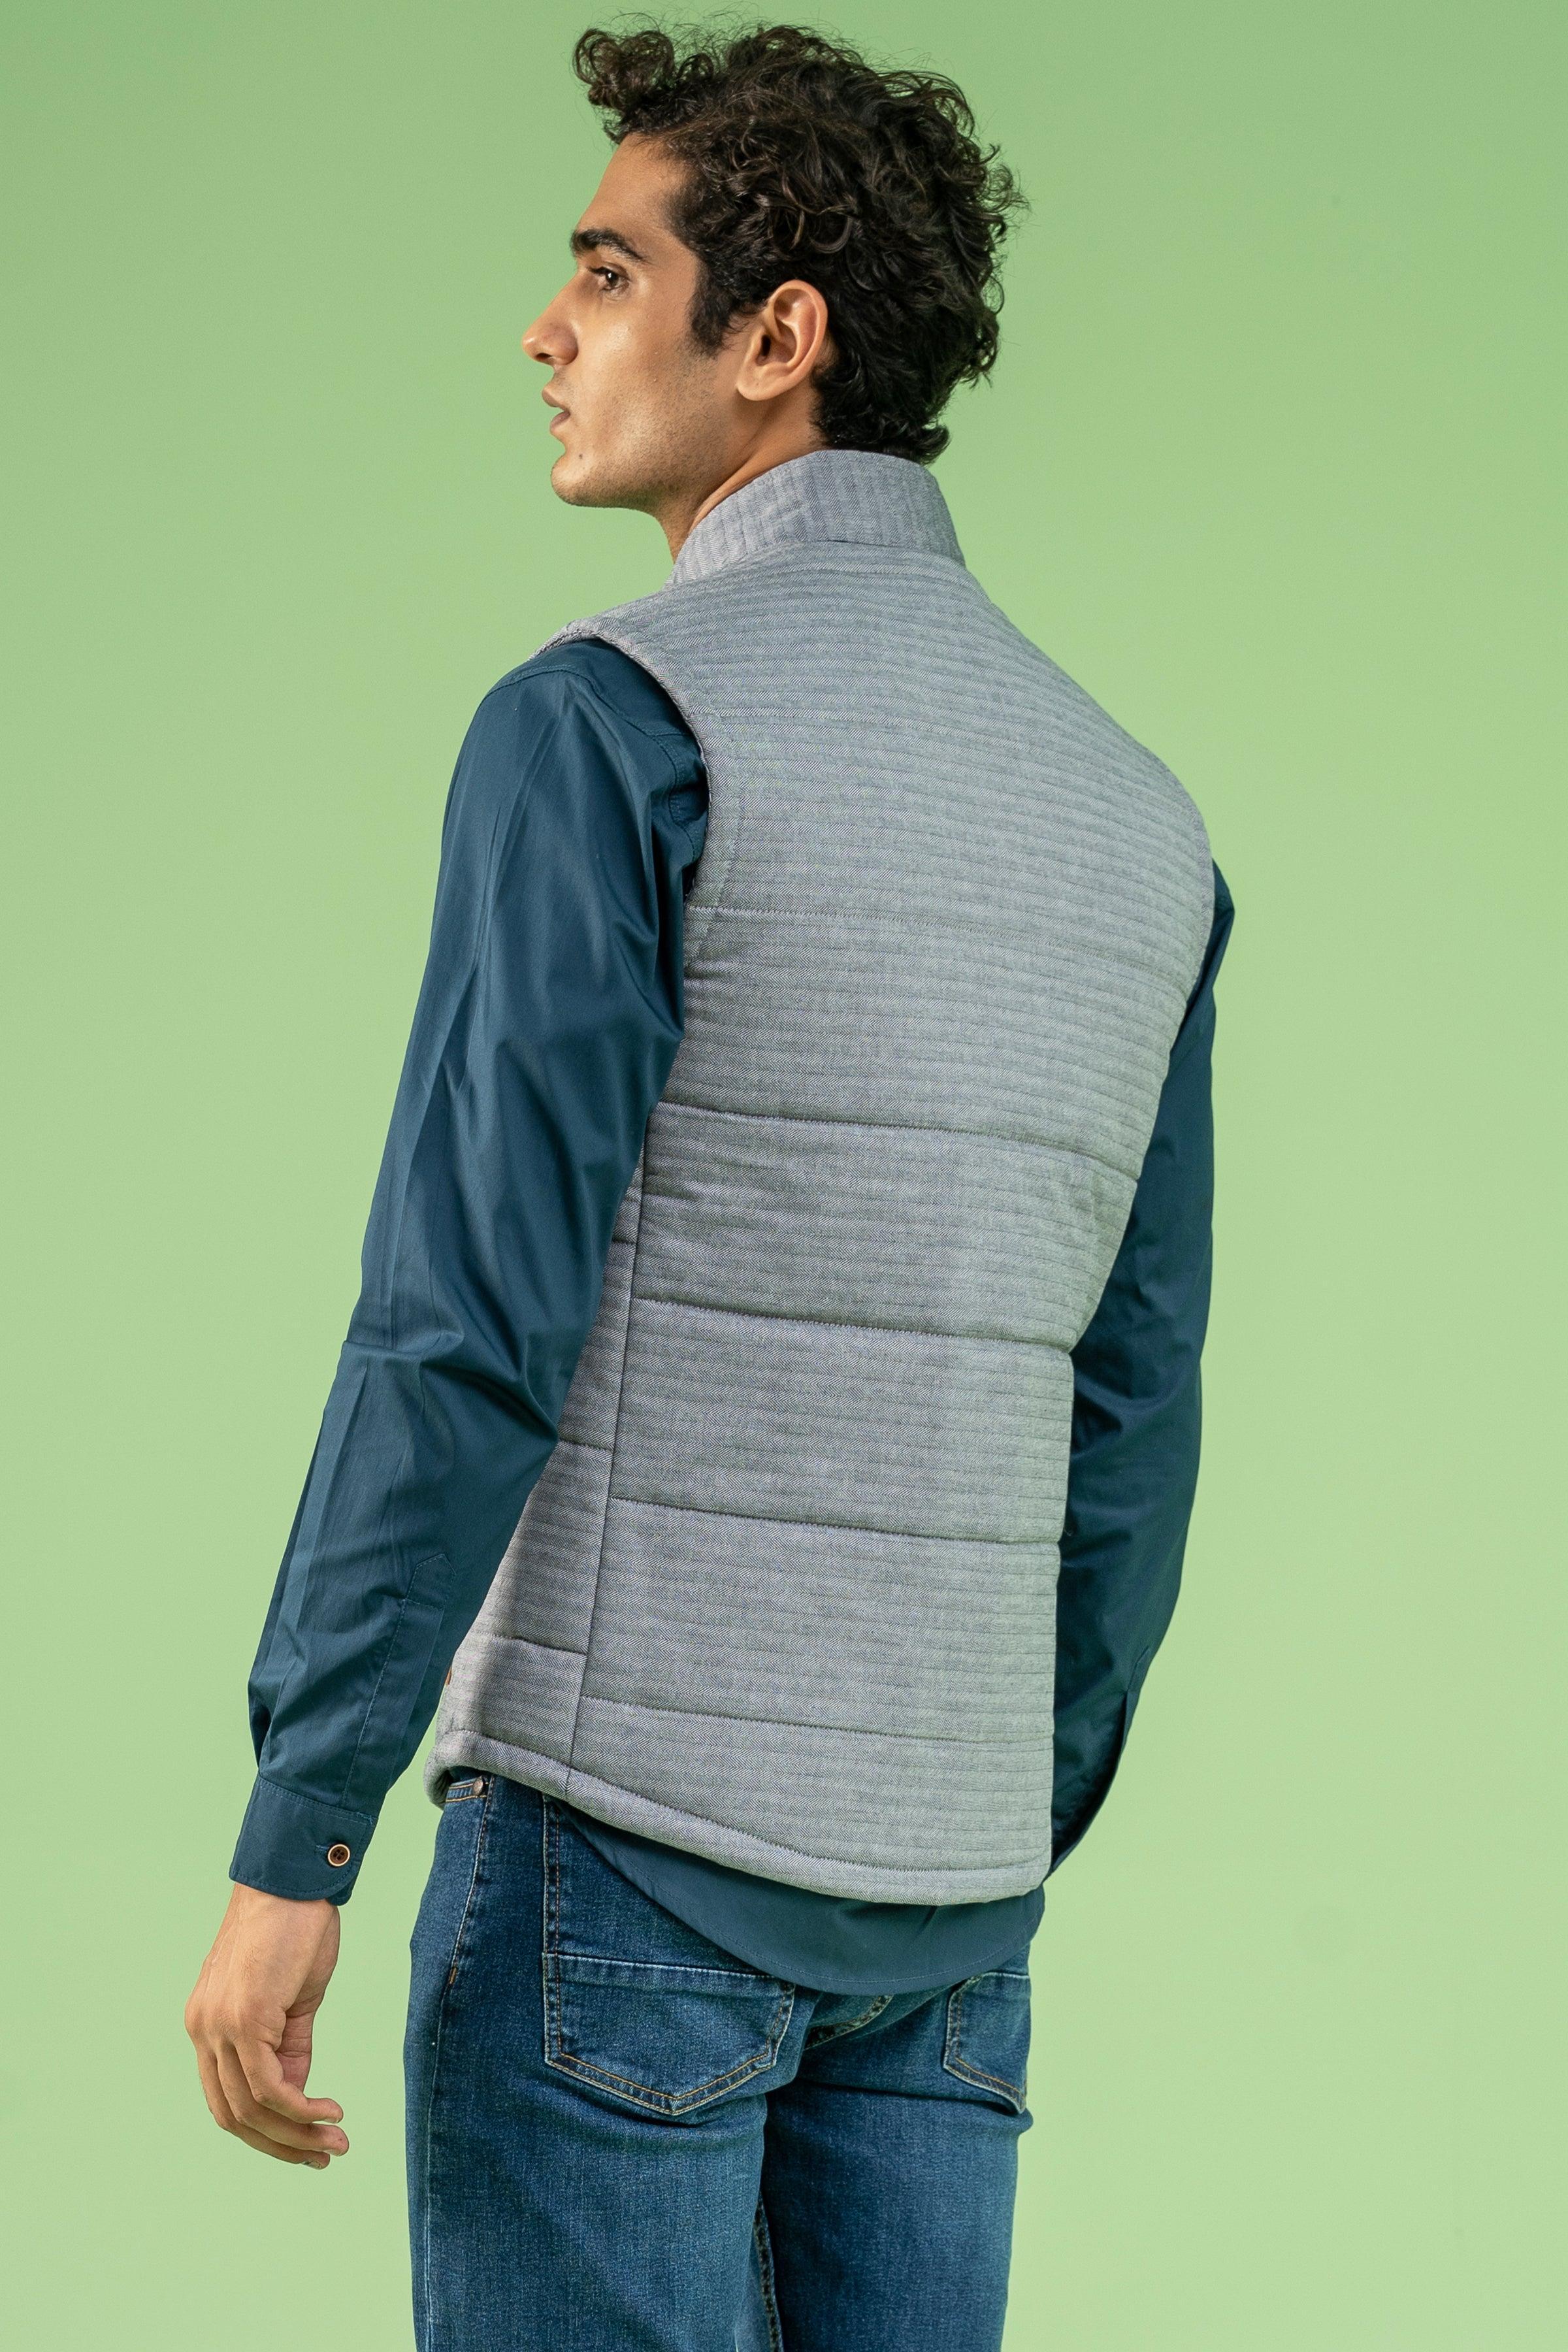 SLEEVELESS CHECK QUILTED JACKET GREY BLACK at Charcoal Clothing